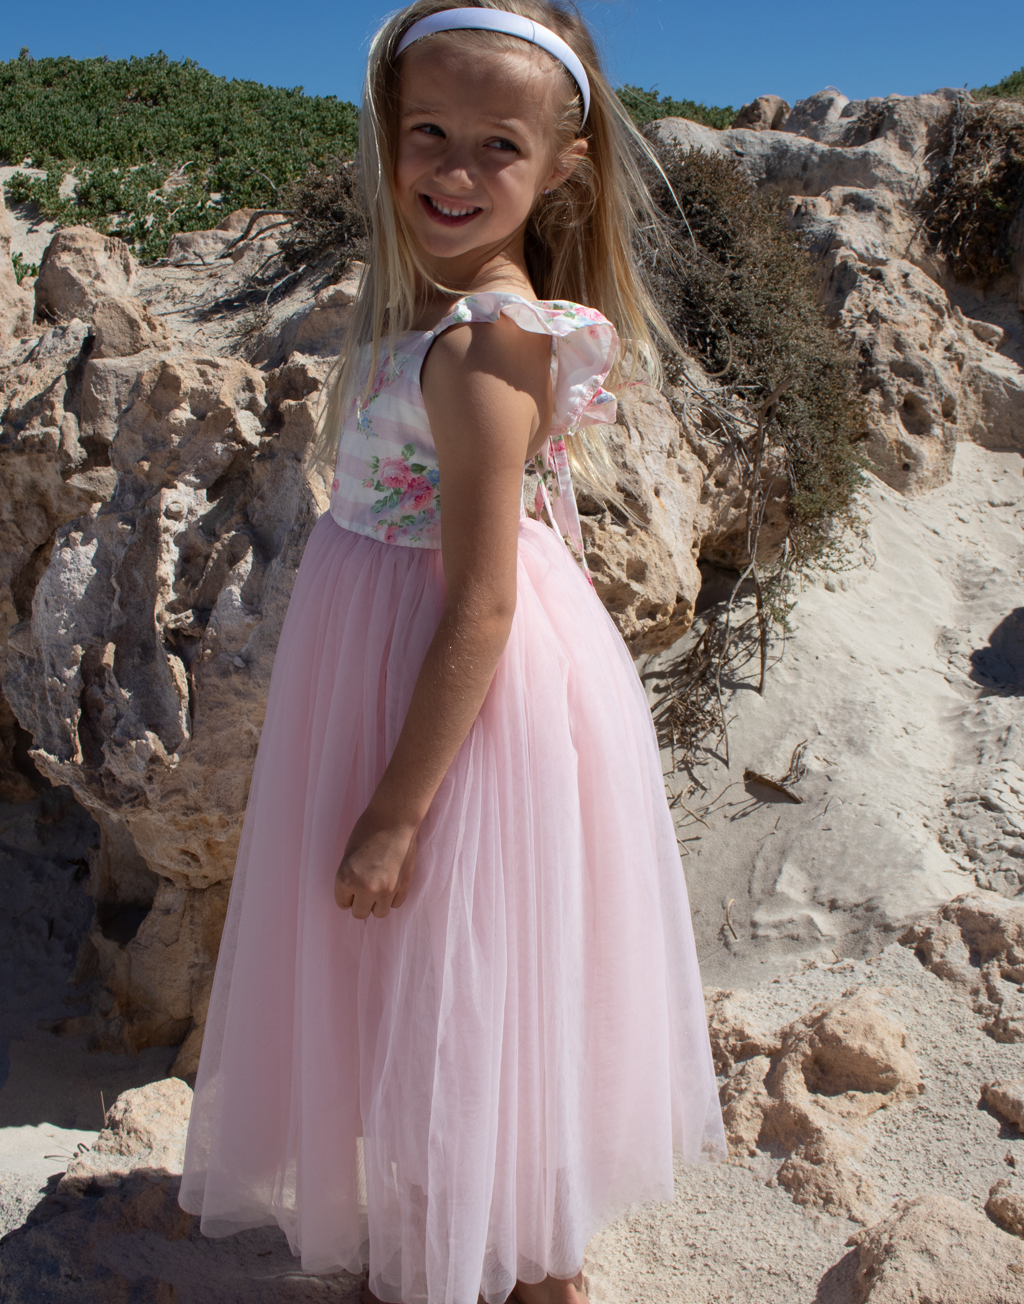 Pixie ~ Party or Flower Girl Dress